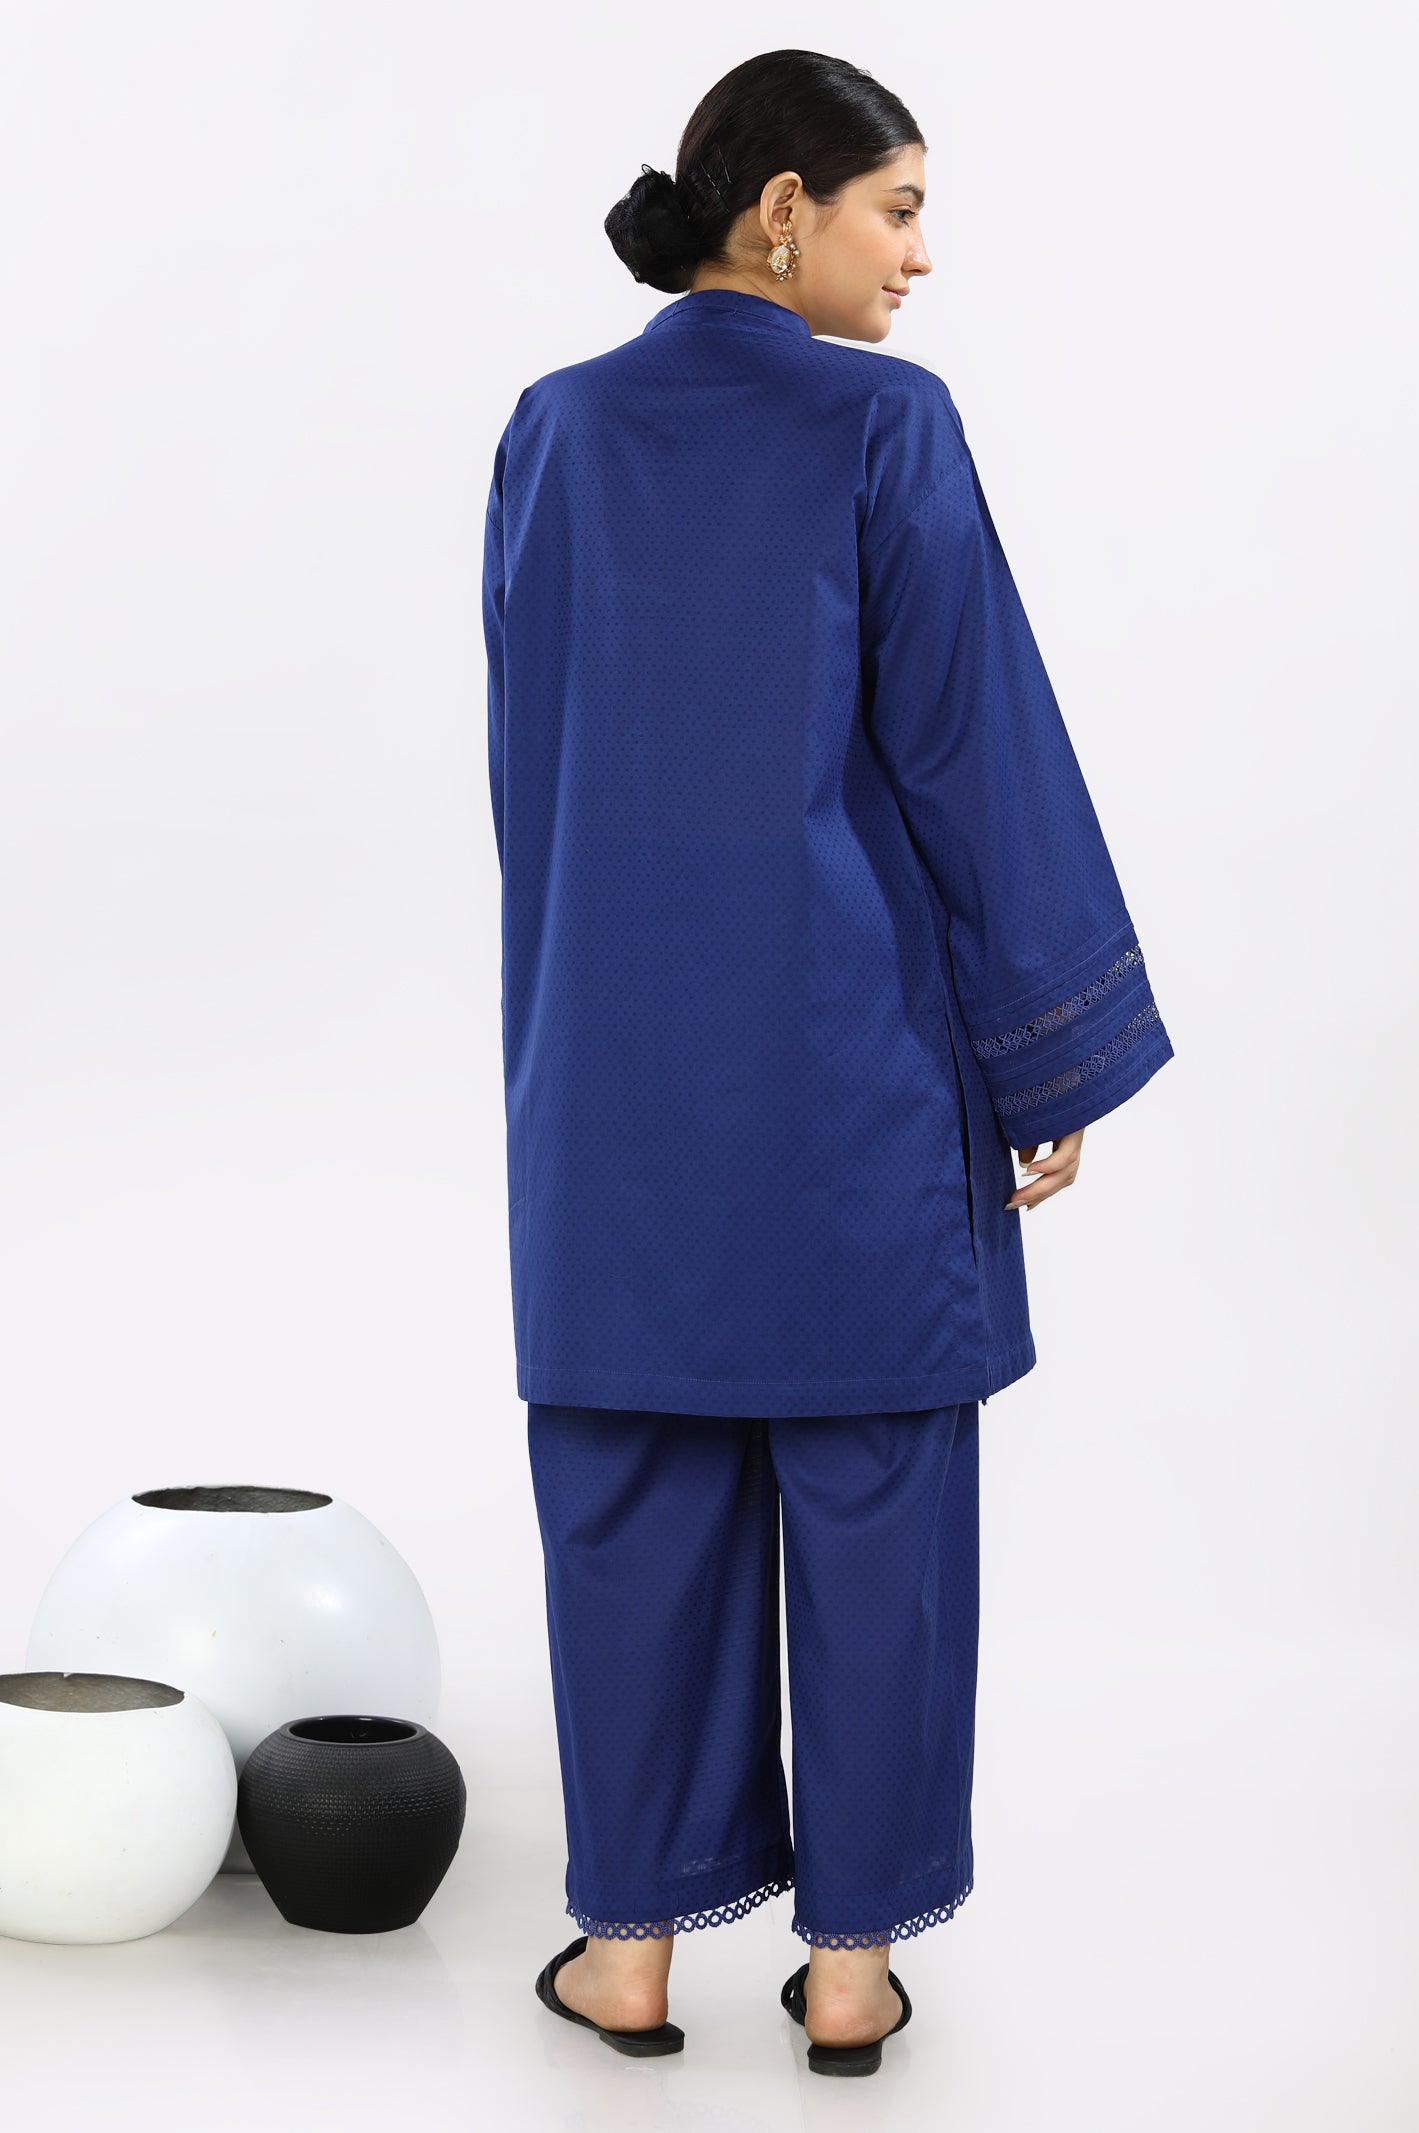 2PC Blue Dobby Suit From Diners